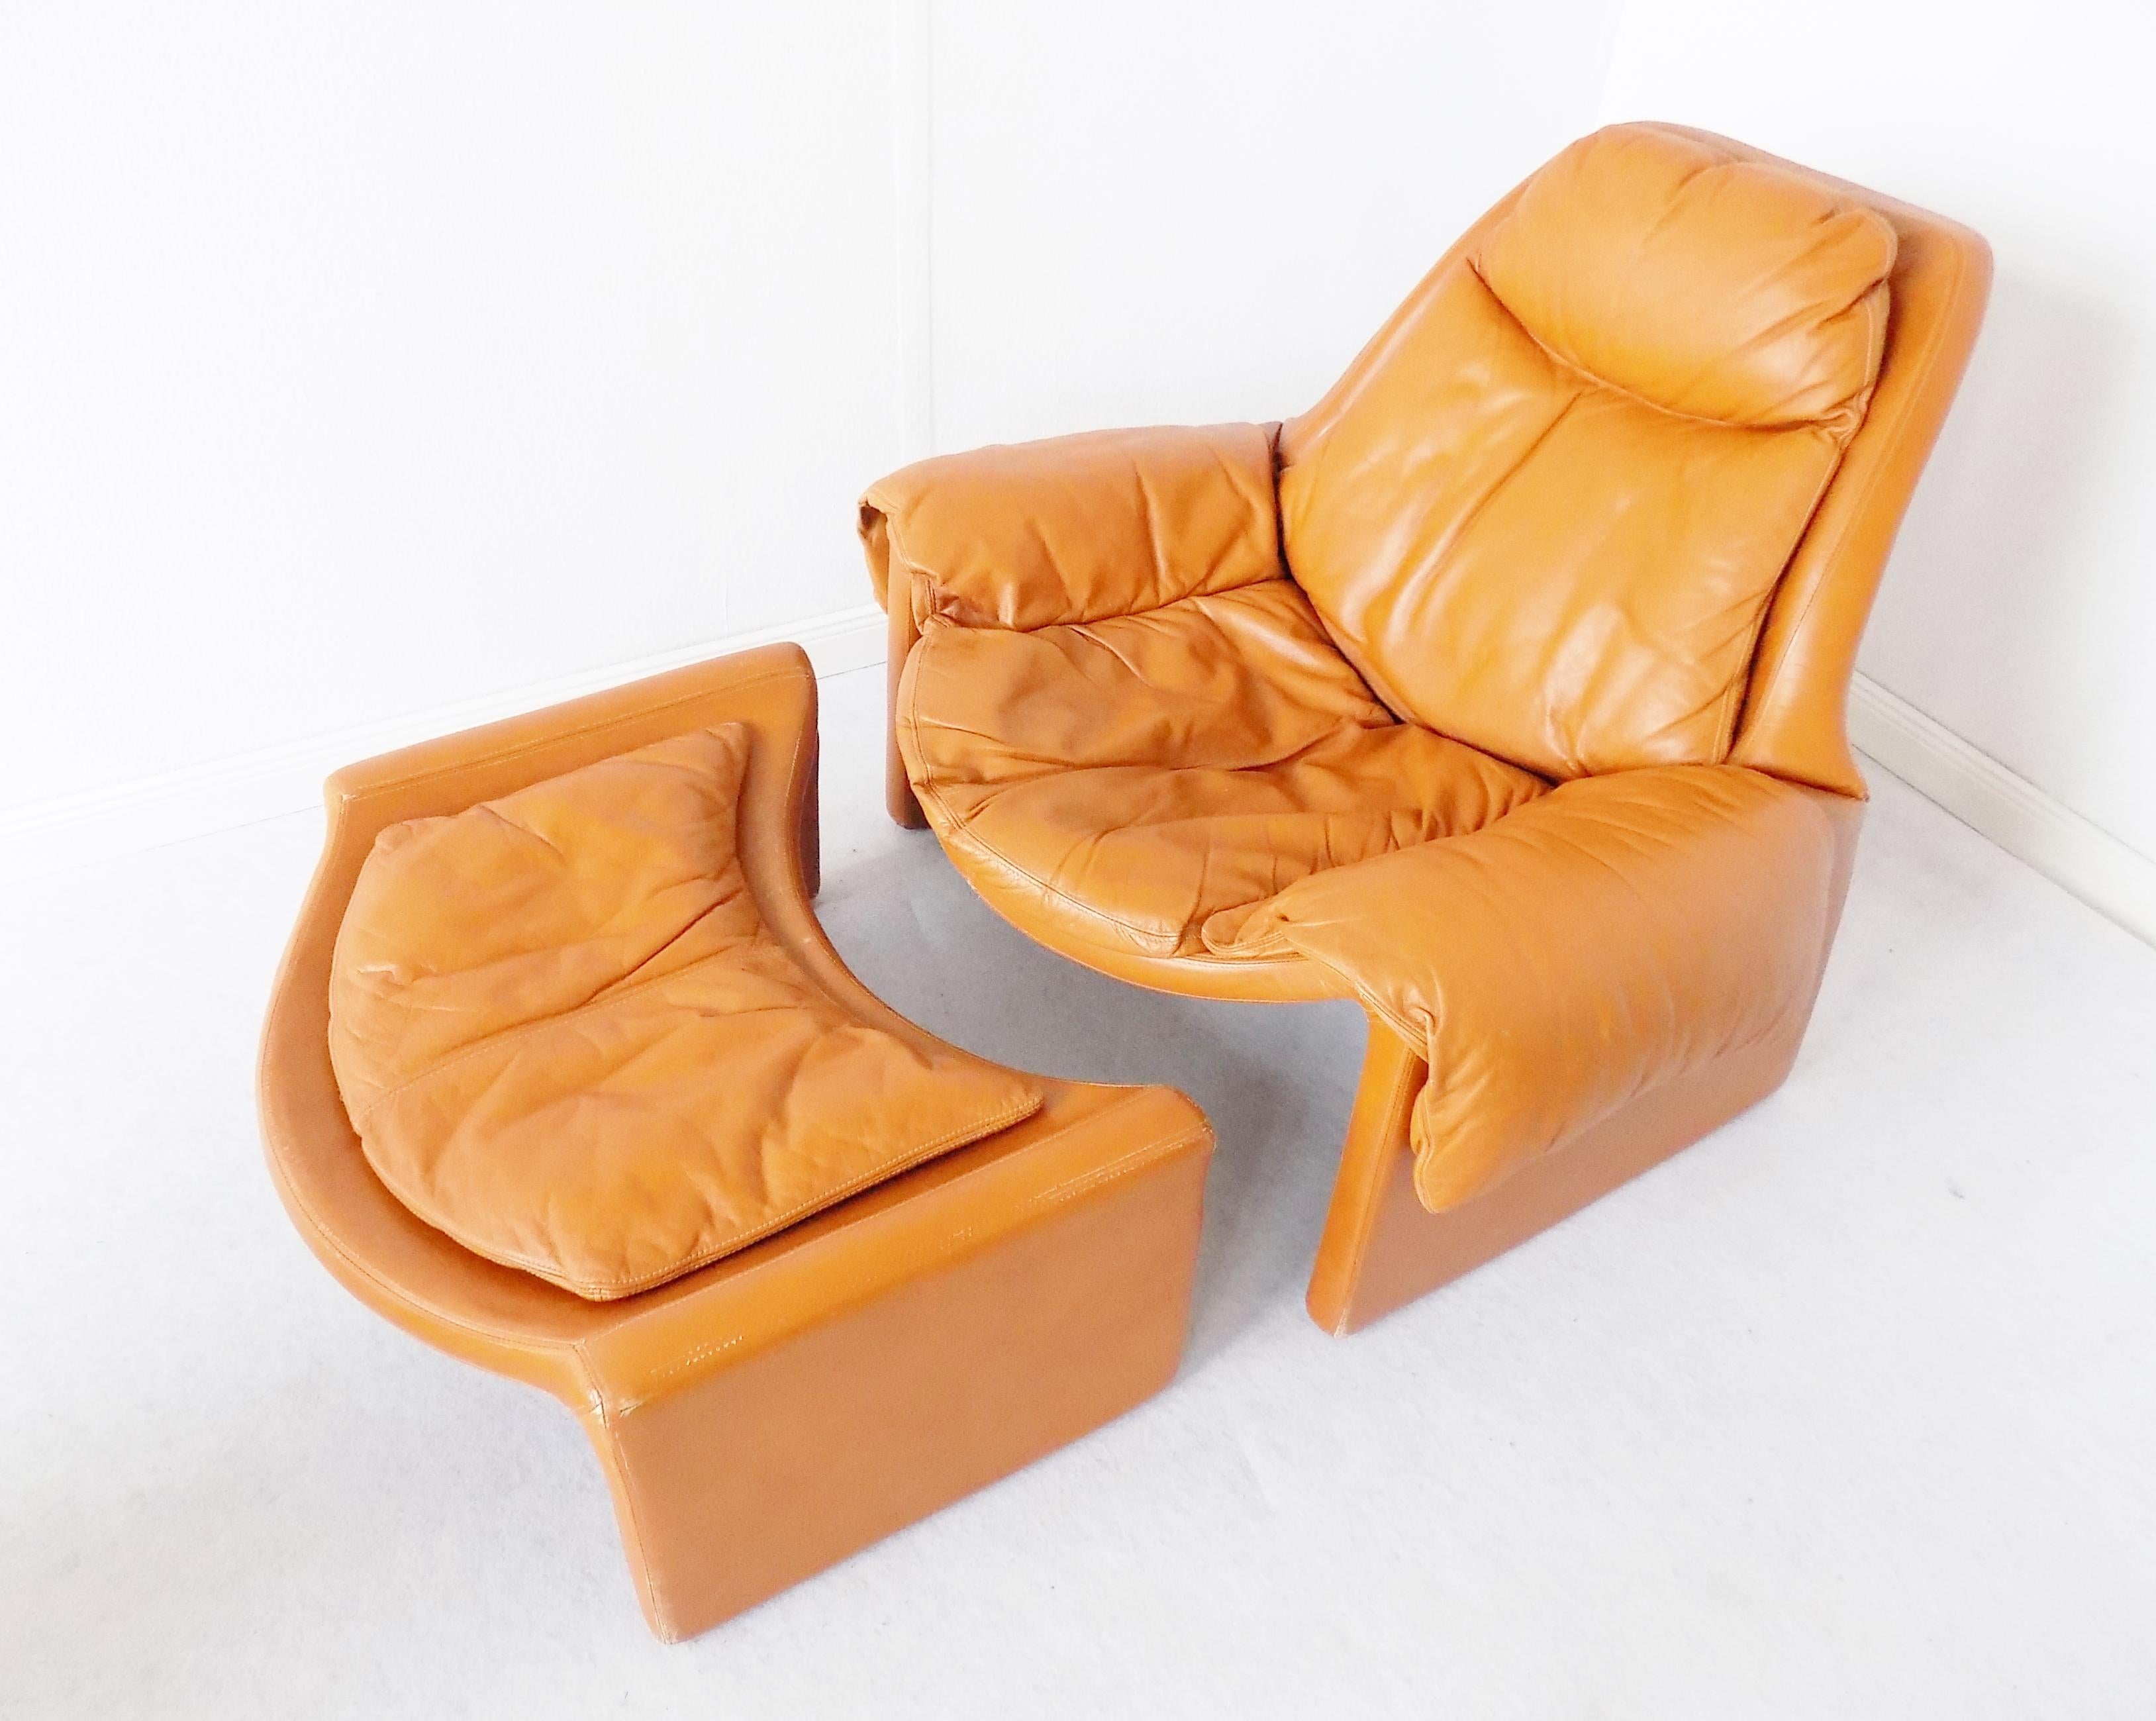 Saporiti P60 Leather Lounge chair with ottoman by Vittorio Introini, Mid-Century Modern, Italian, caramel

This model is made from the finest leather in a fantastic caramel color and original, rare ottoman included. The lounge chair comes in